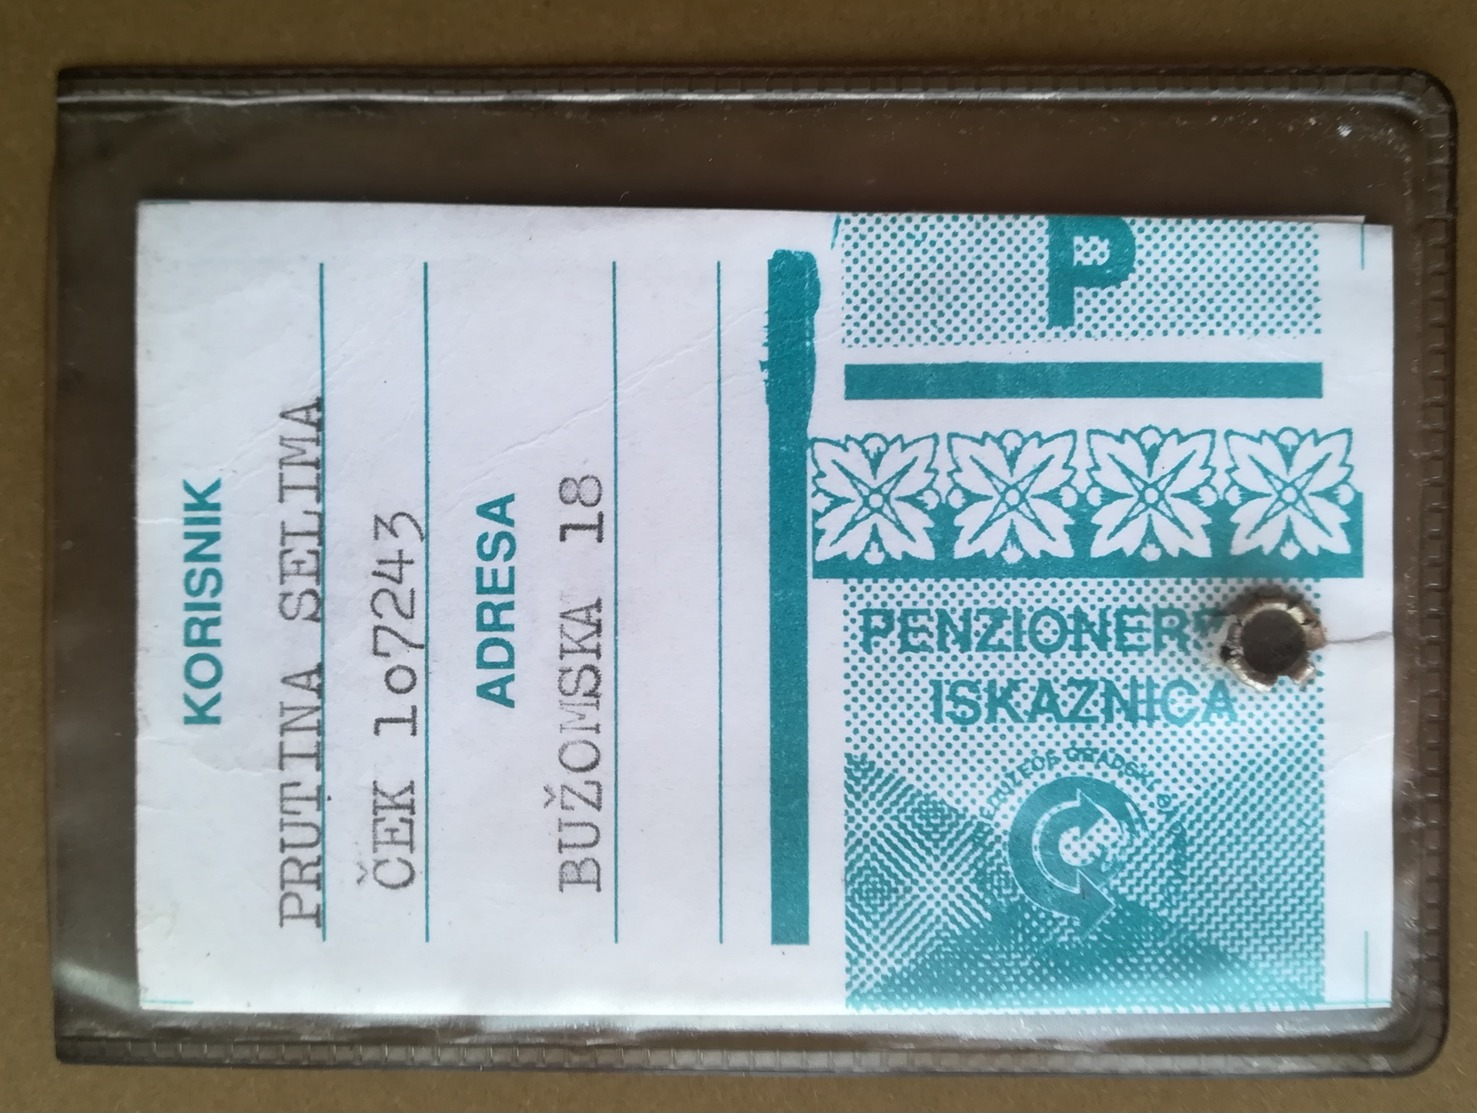 BOSNIA AND HERZEGOVINA Female Annual Public Transport Ticket For Retired People WOMAN WITH HIJAB - Europe